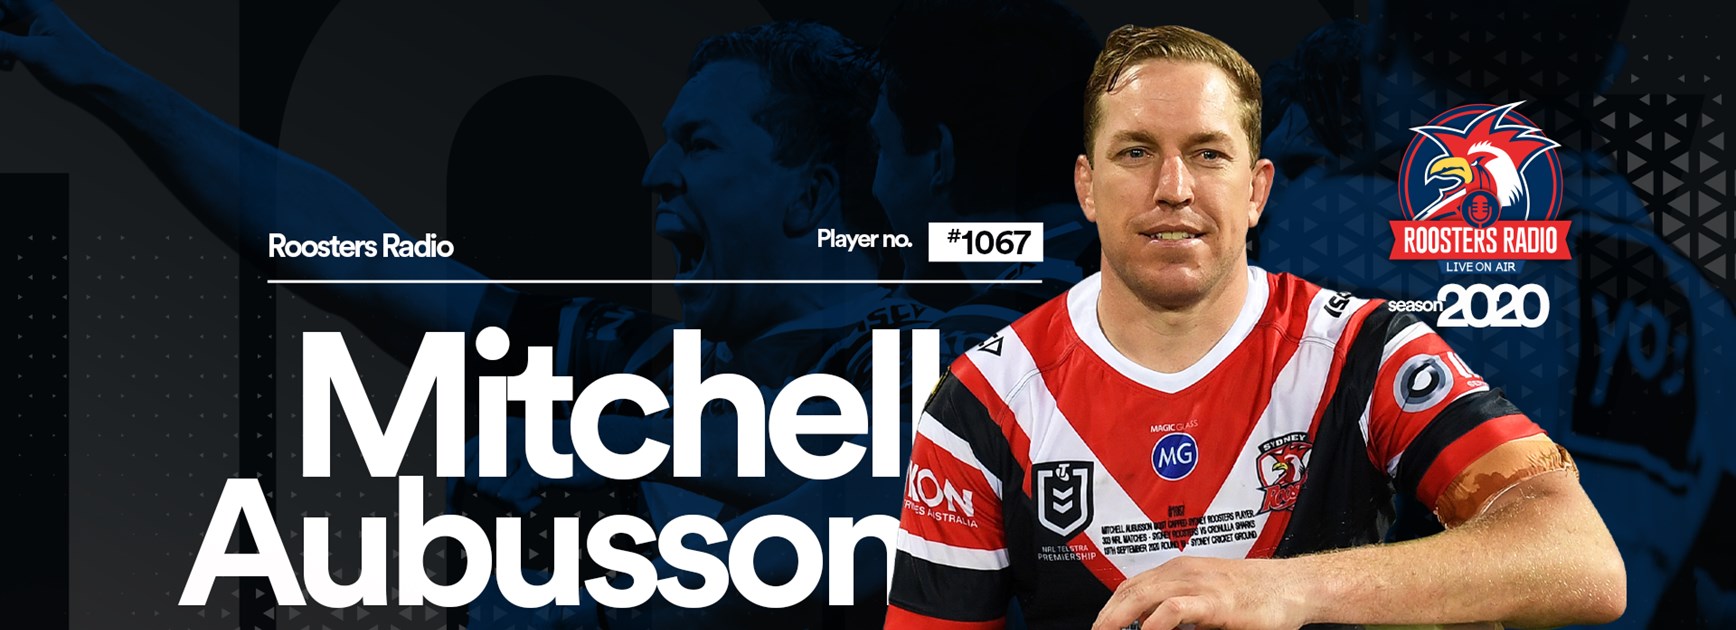 Roosters Radio | Mitchell Aubusson